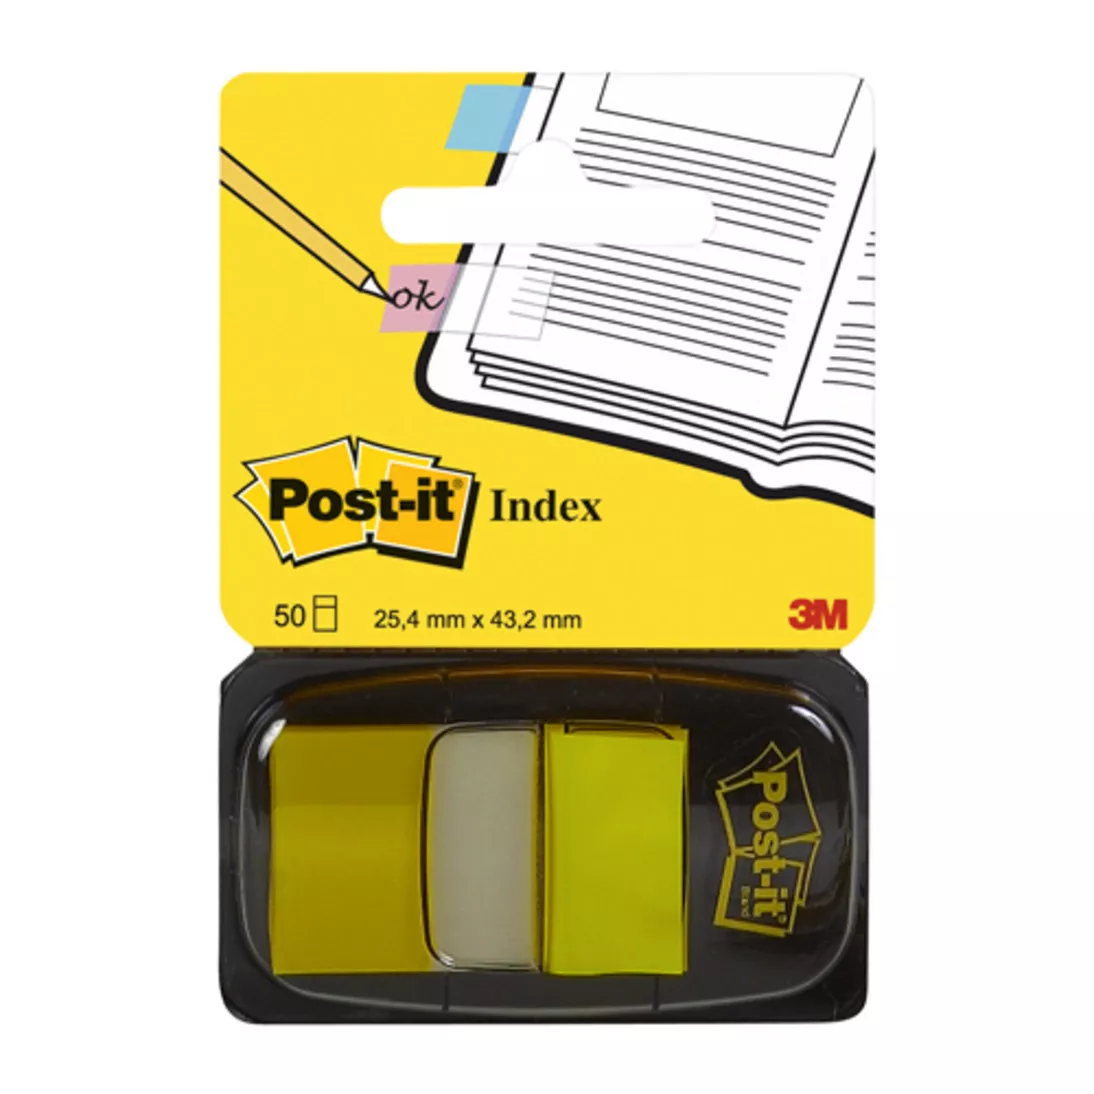 Post-it® Flags 680-5 (36), 1 in x 1.7 in (25,4 mm x 43,2 mm) Canary
Yellow 50 flags/pd 36/cs